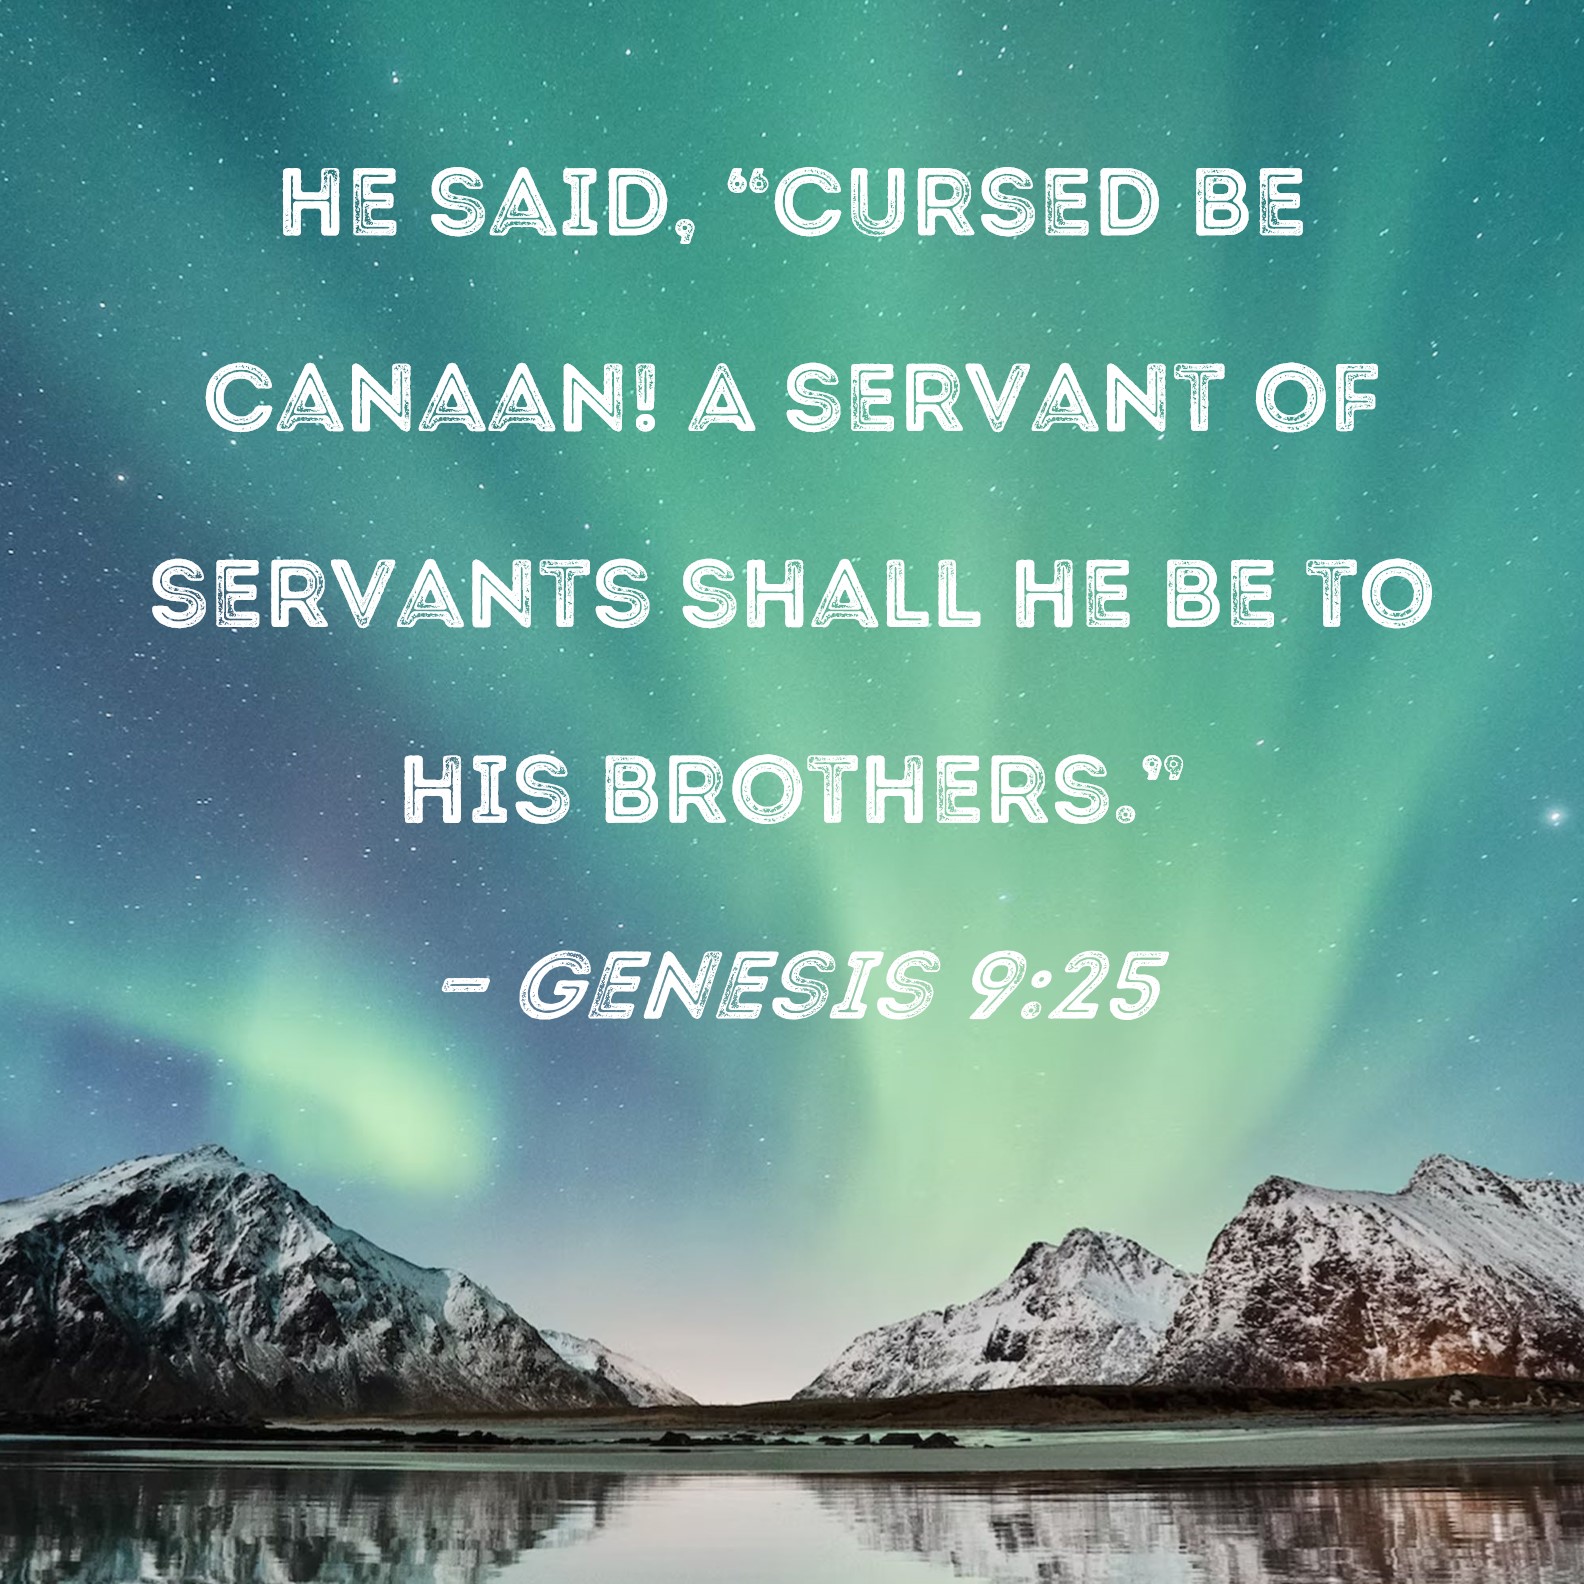 Genesis 9:25 he said, Cursed be Canaan! A servant of servants shall he be  to his brothers.